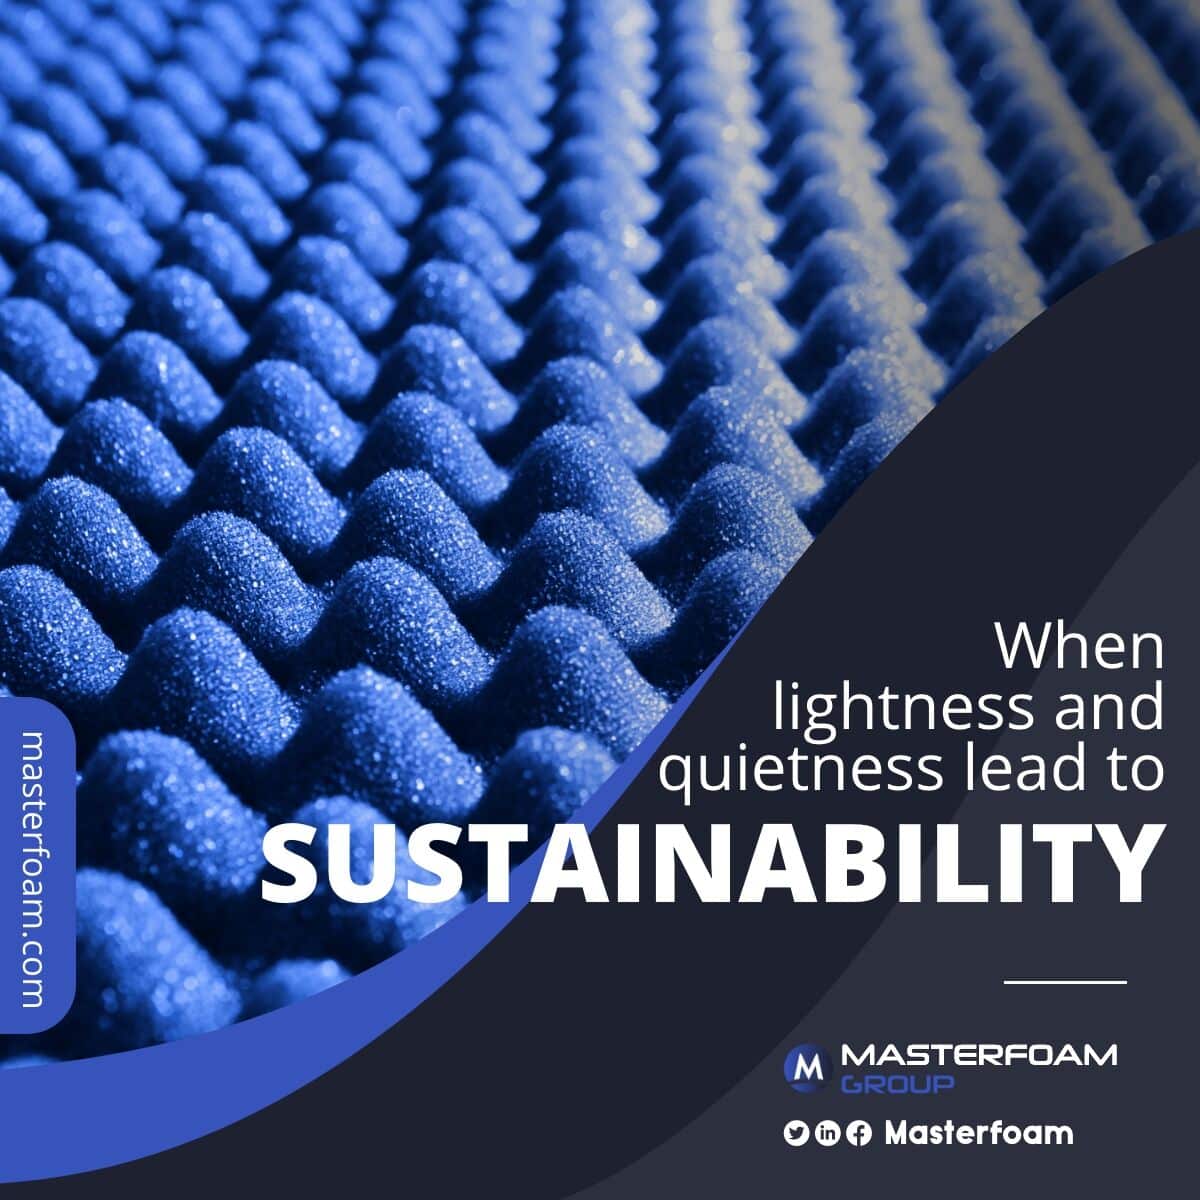 When lightness and quietness lead to Sustainability